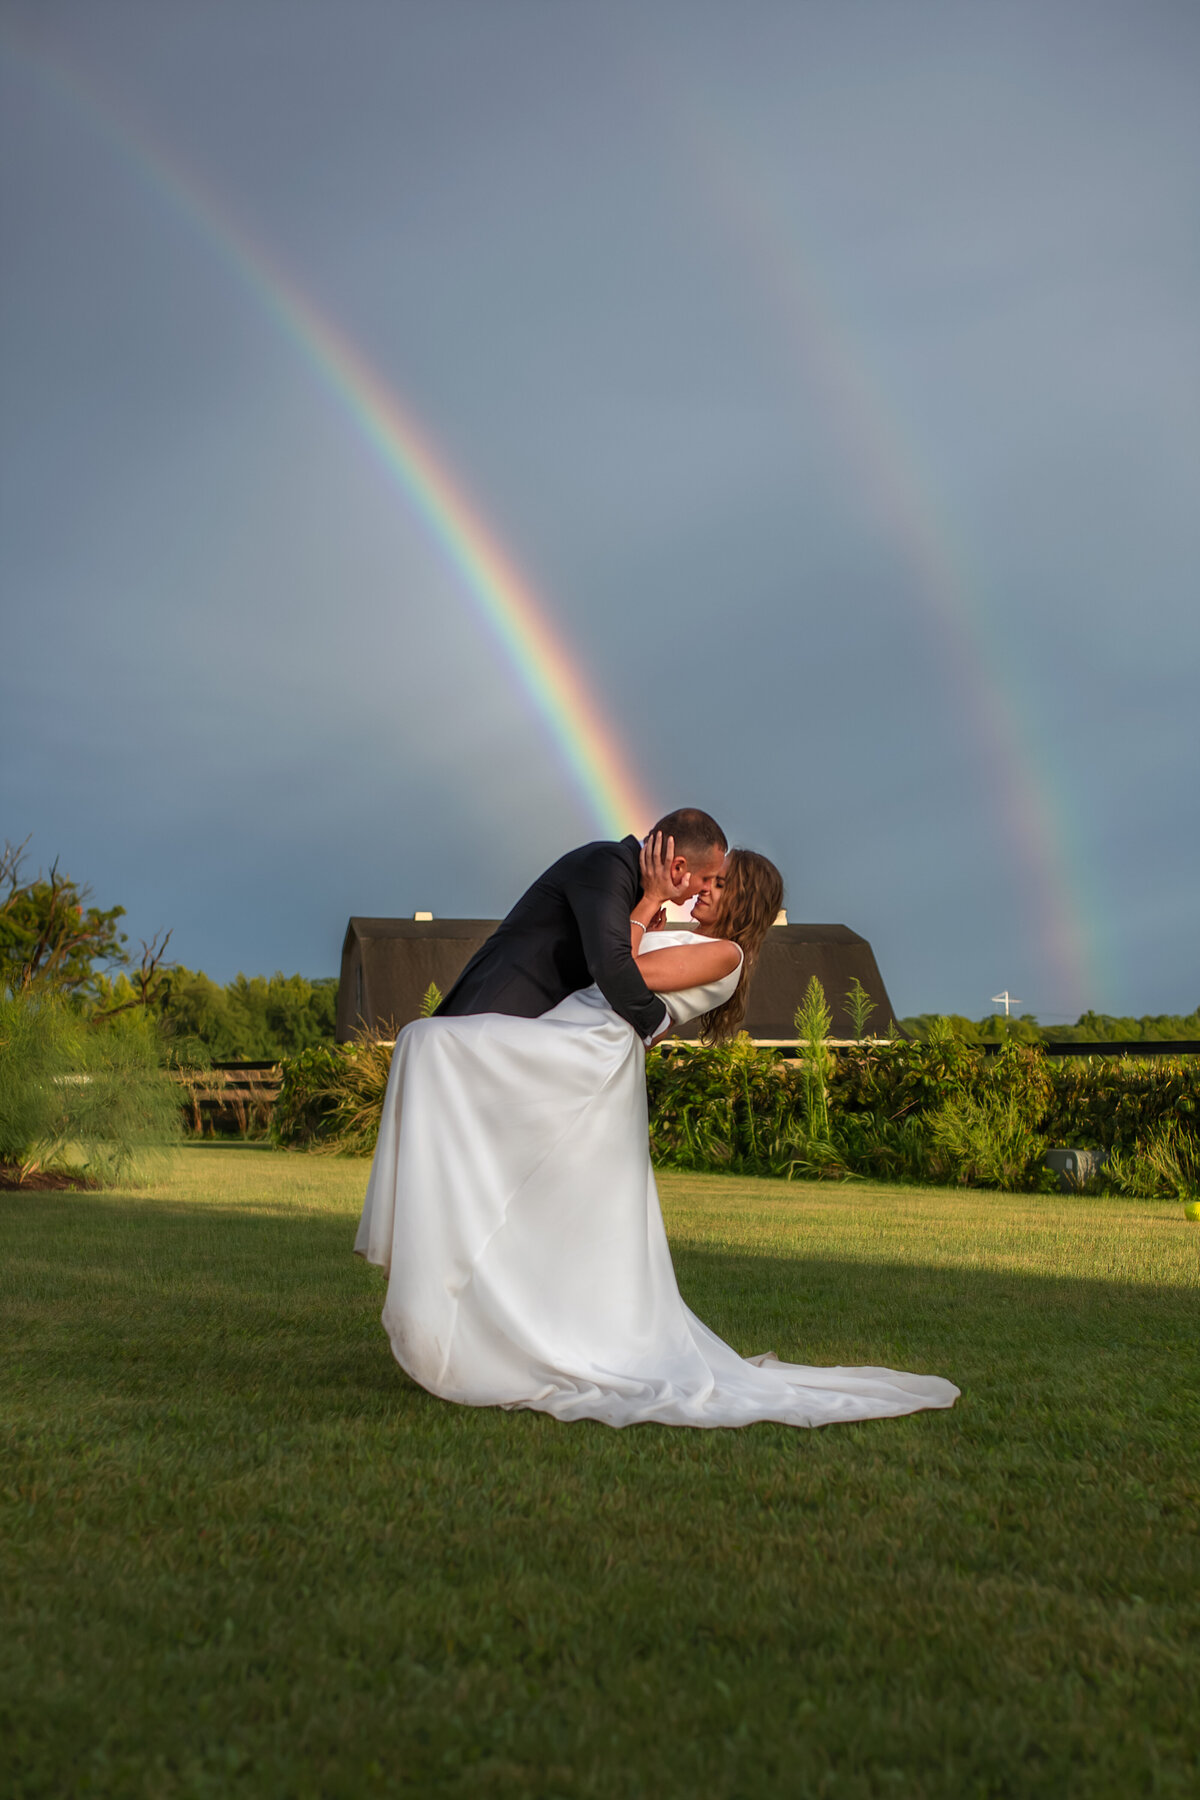 groom dips the bride for a kiss after the rain when two rainbows show up in the sky